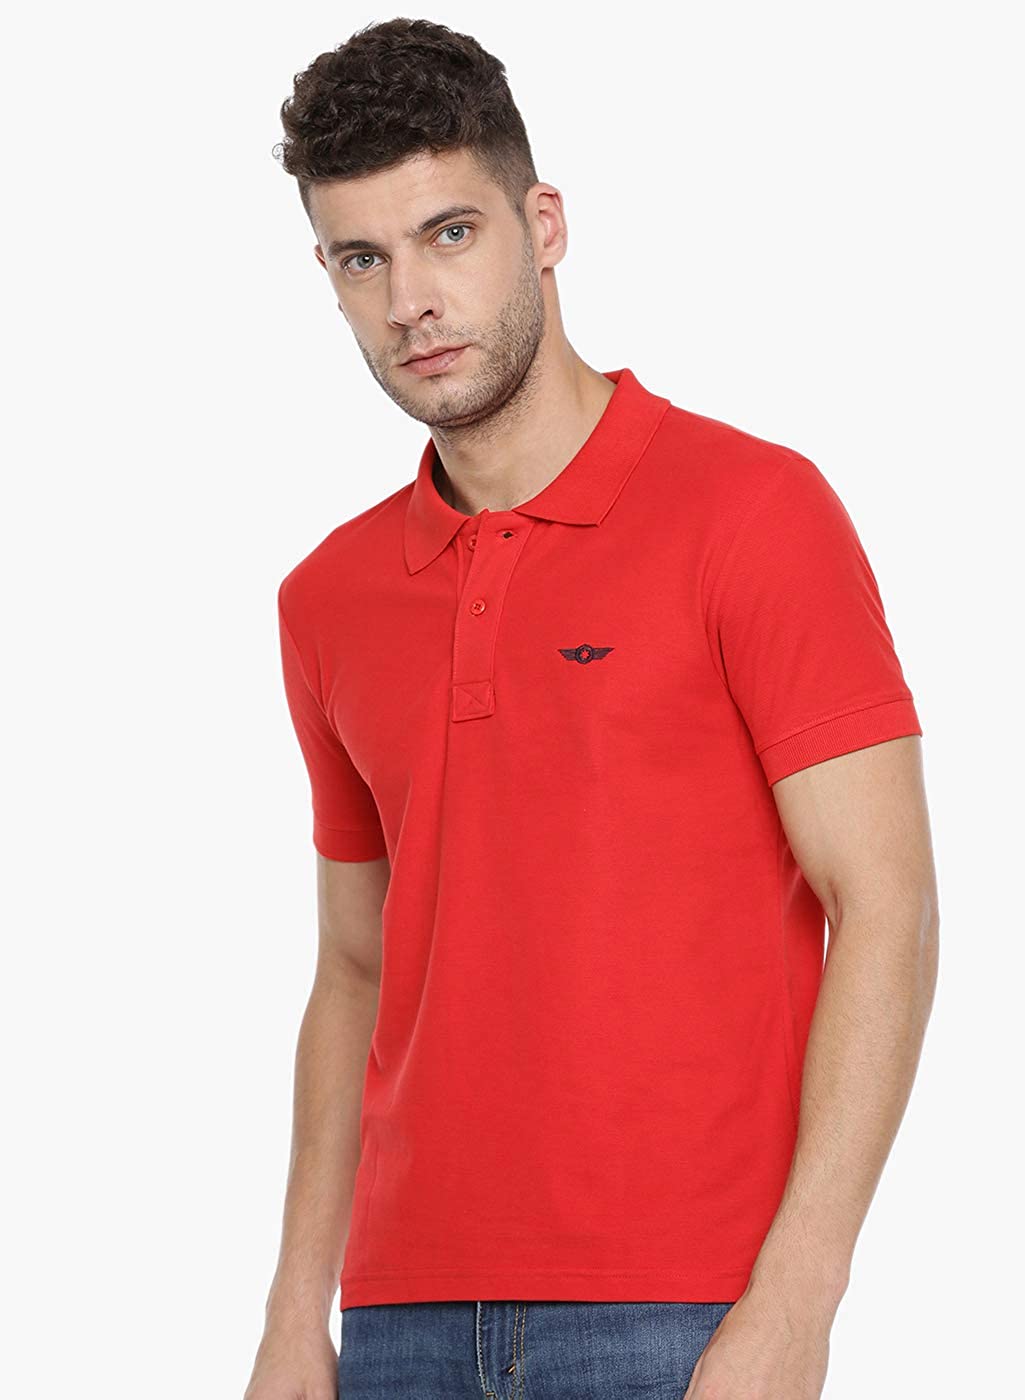 Red Slim Fit Polo Neck T-Shirt with collar for Men - Stilento